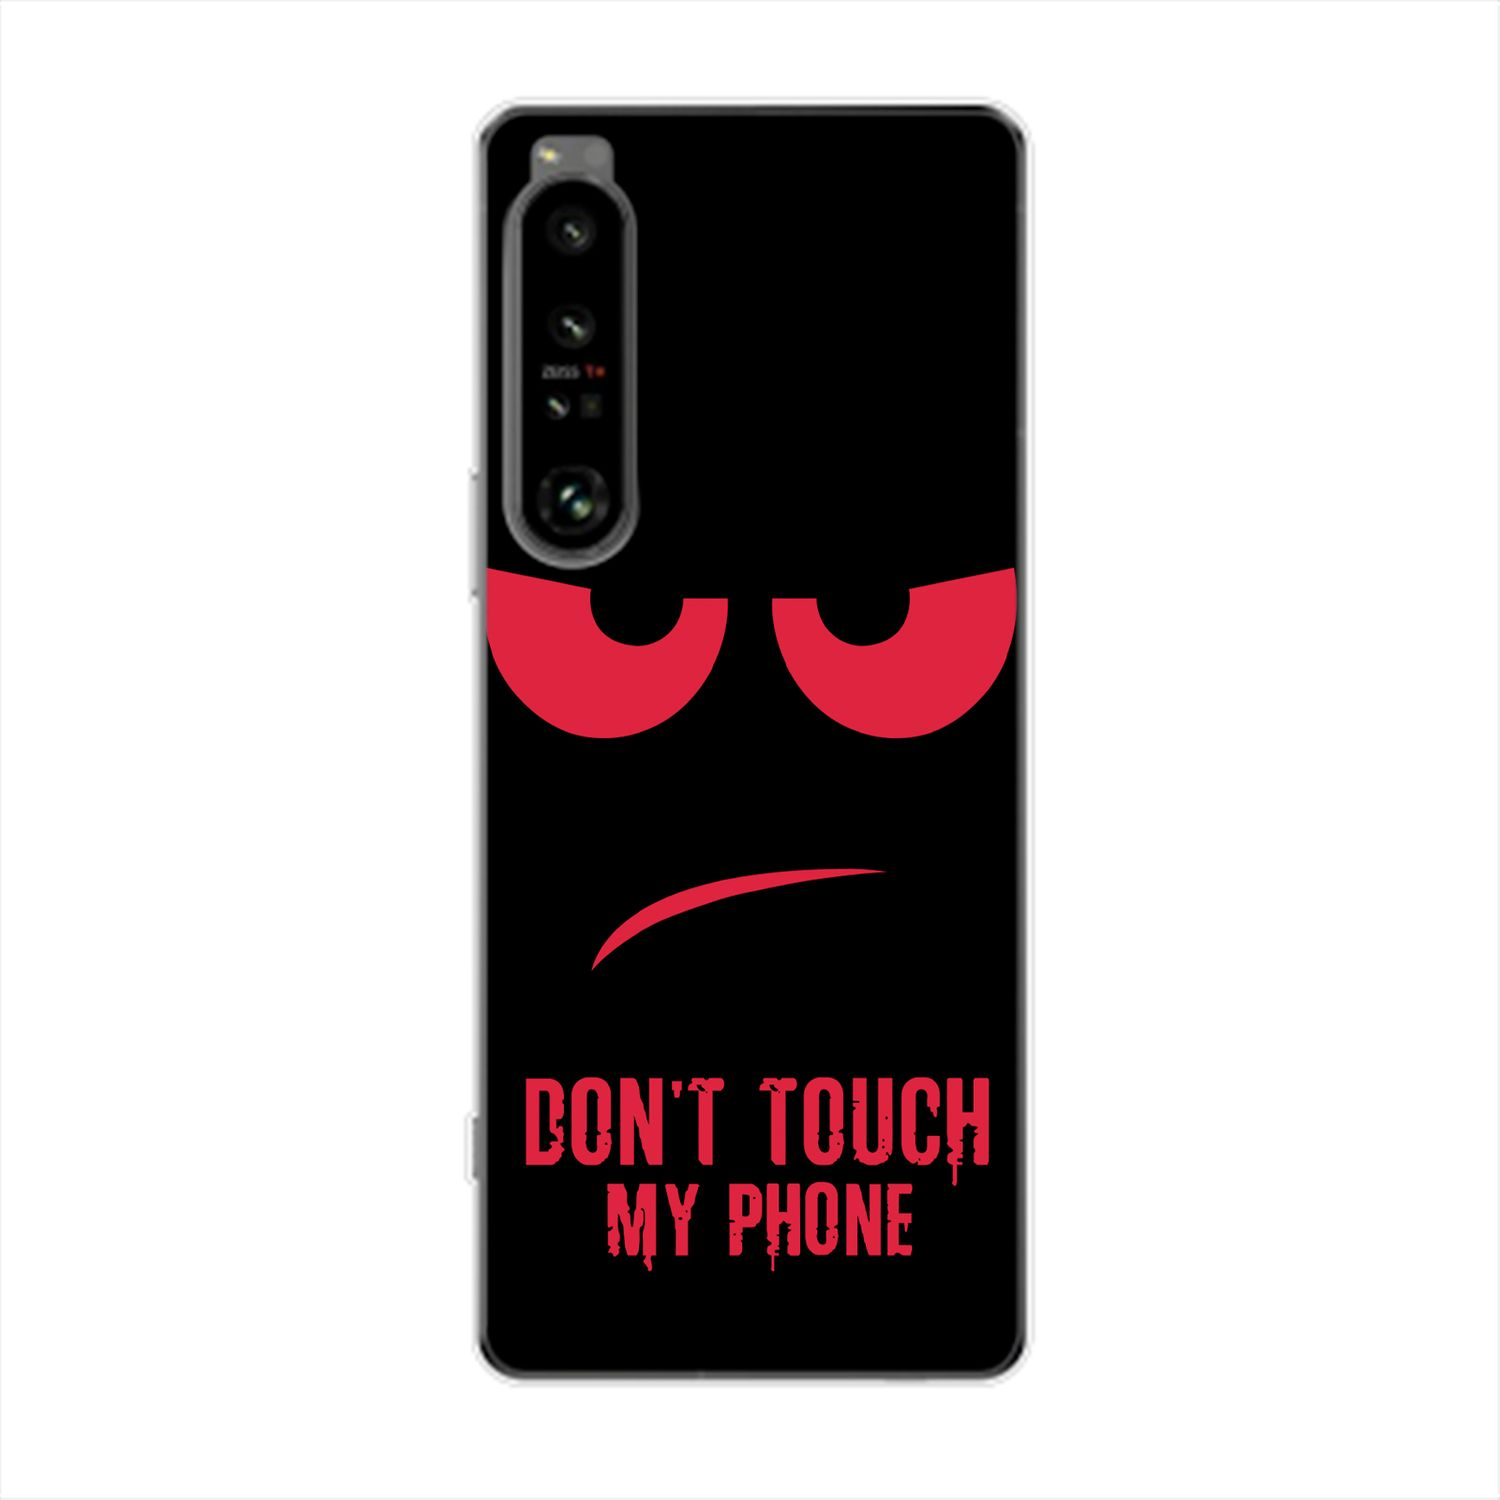 Rot Phone Xperia Case, 1 My IV, Backcover, Dont Touch DESIGN Sony, KÖNIG